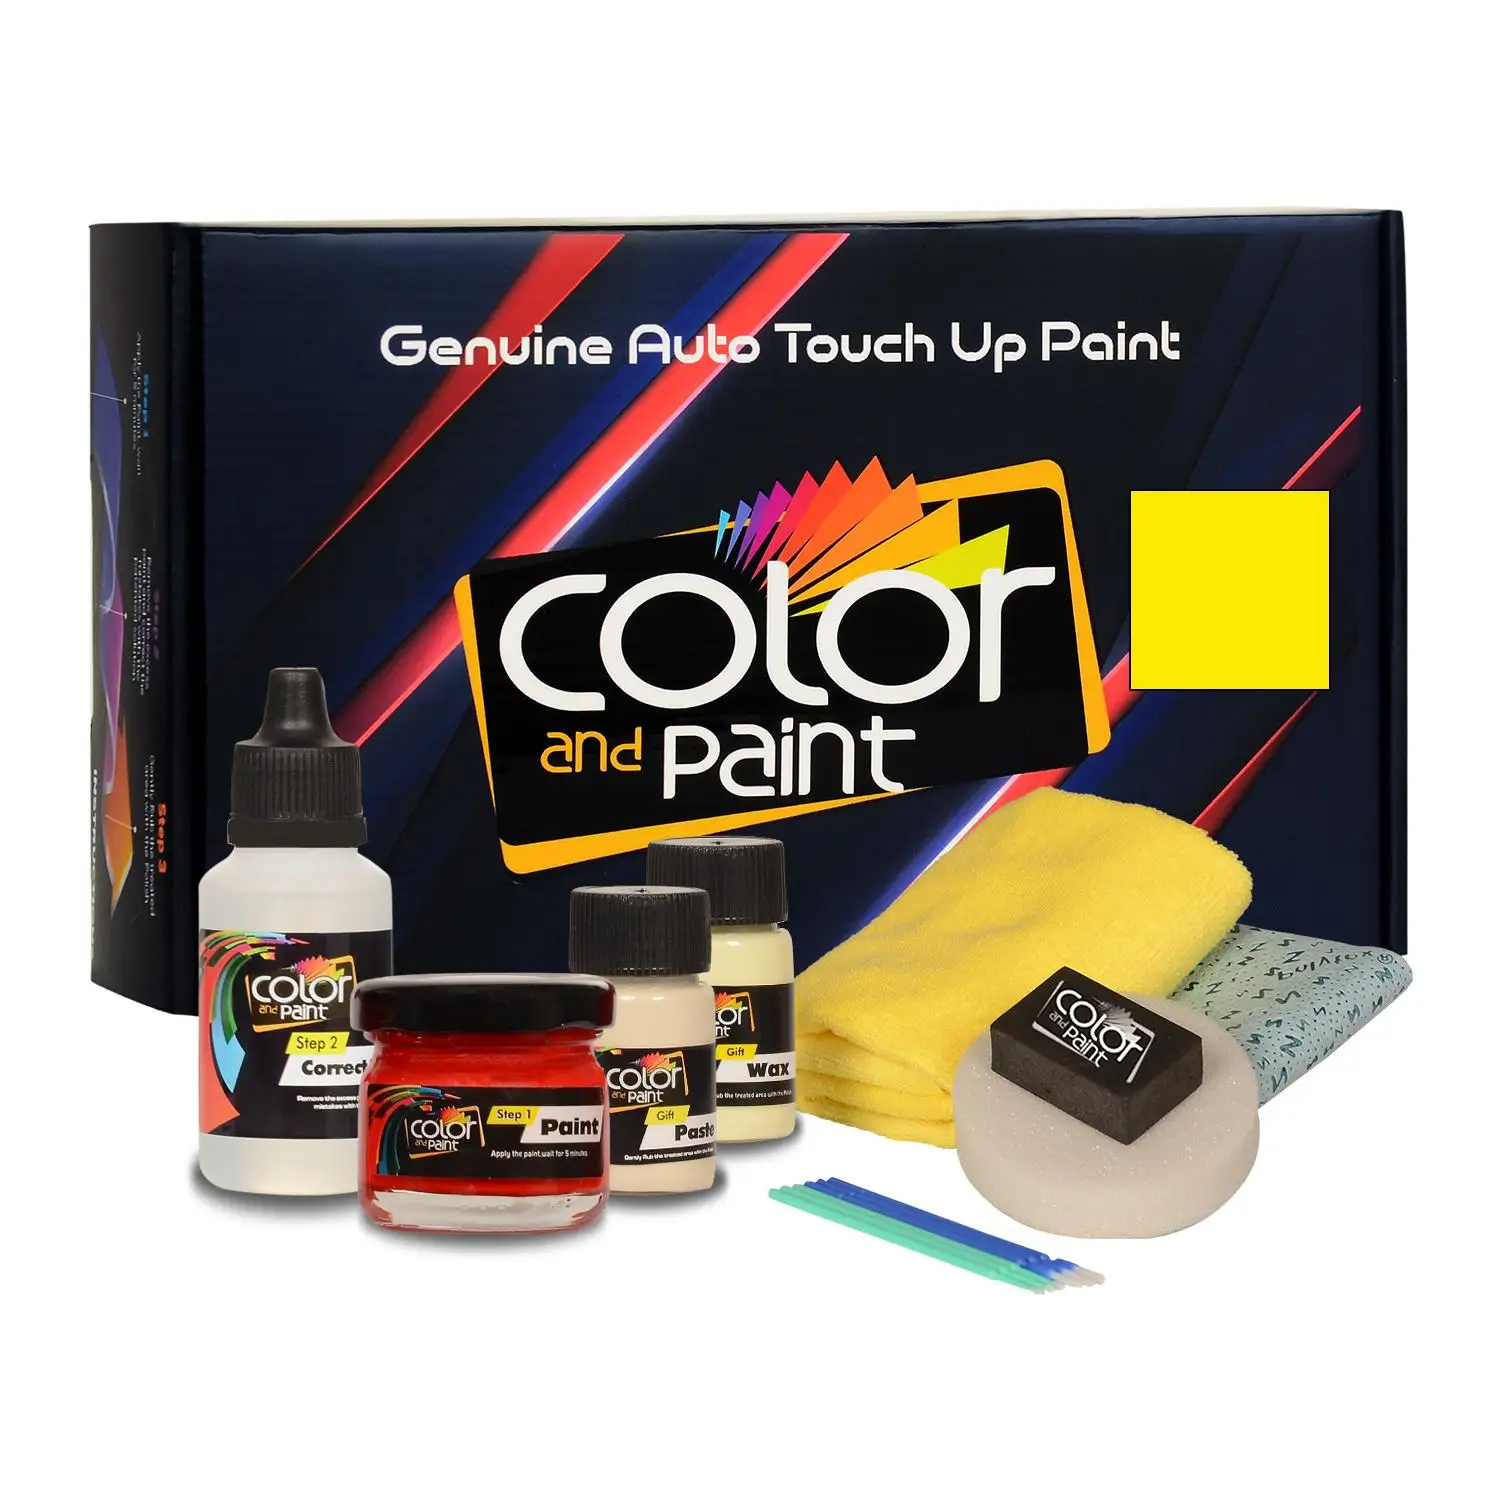 

Color and Paint compatible with Opel Automotive Touch Up Paint - DAENISCH POST GELB MATT - 806 - Basic Care